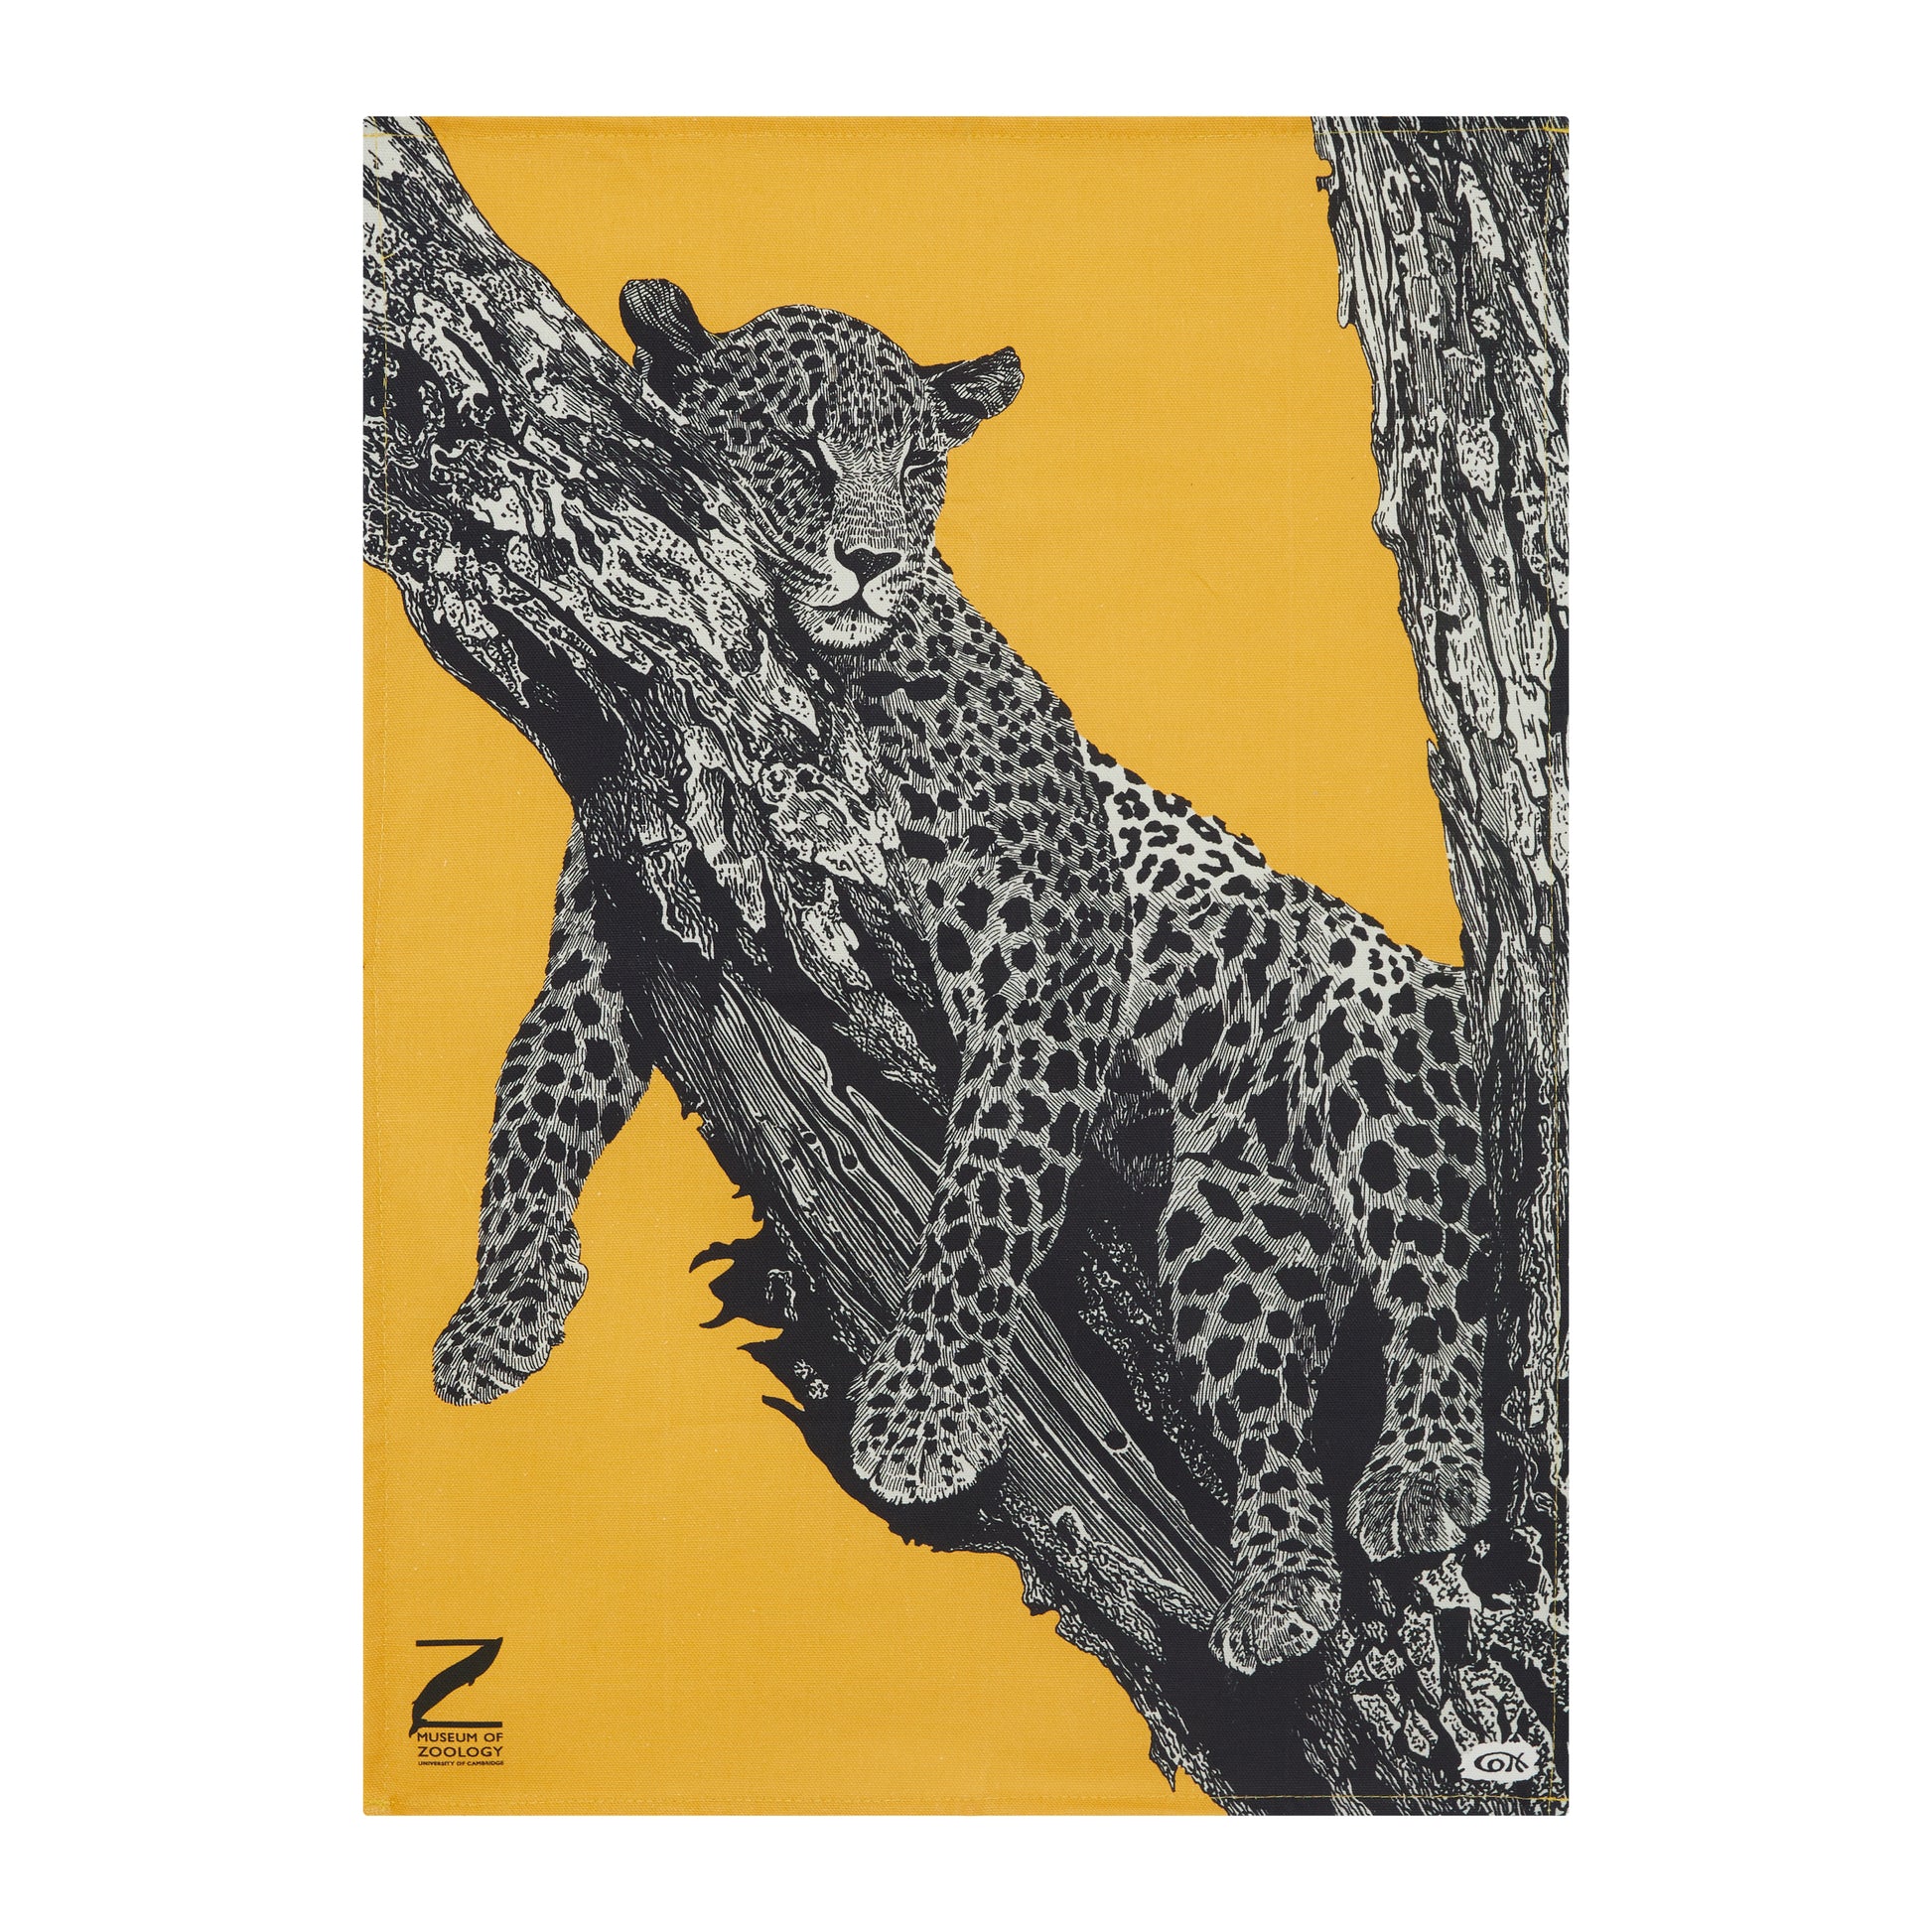 Tea towel = sleeping leopard illustration in black and white, with mustard yellow background. Museum of Zoology logo in black, bottom left.